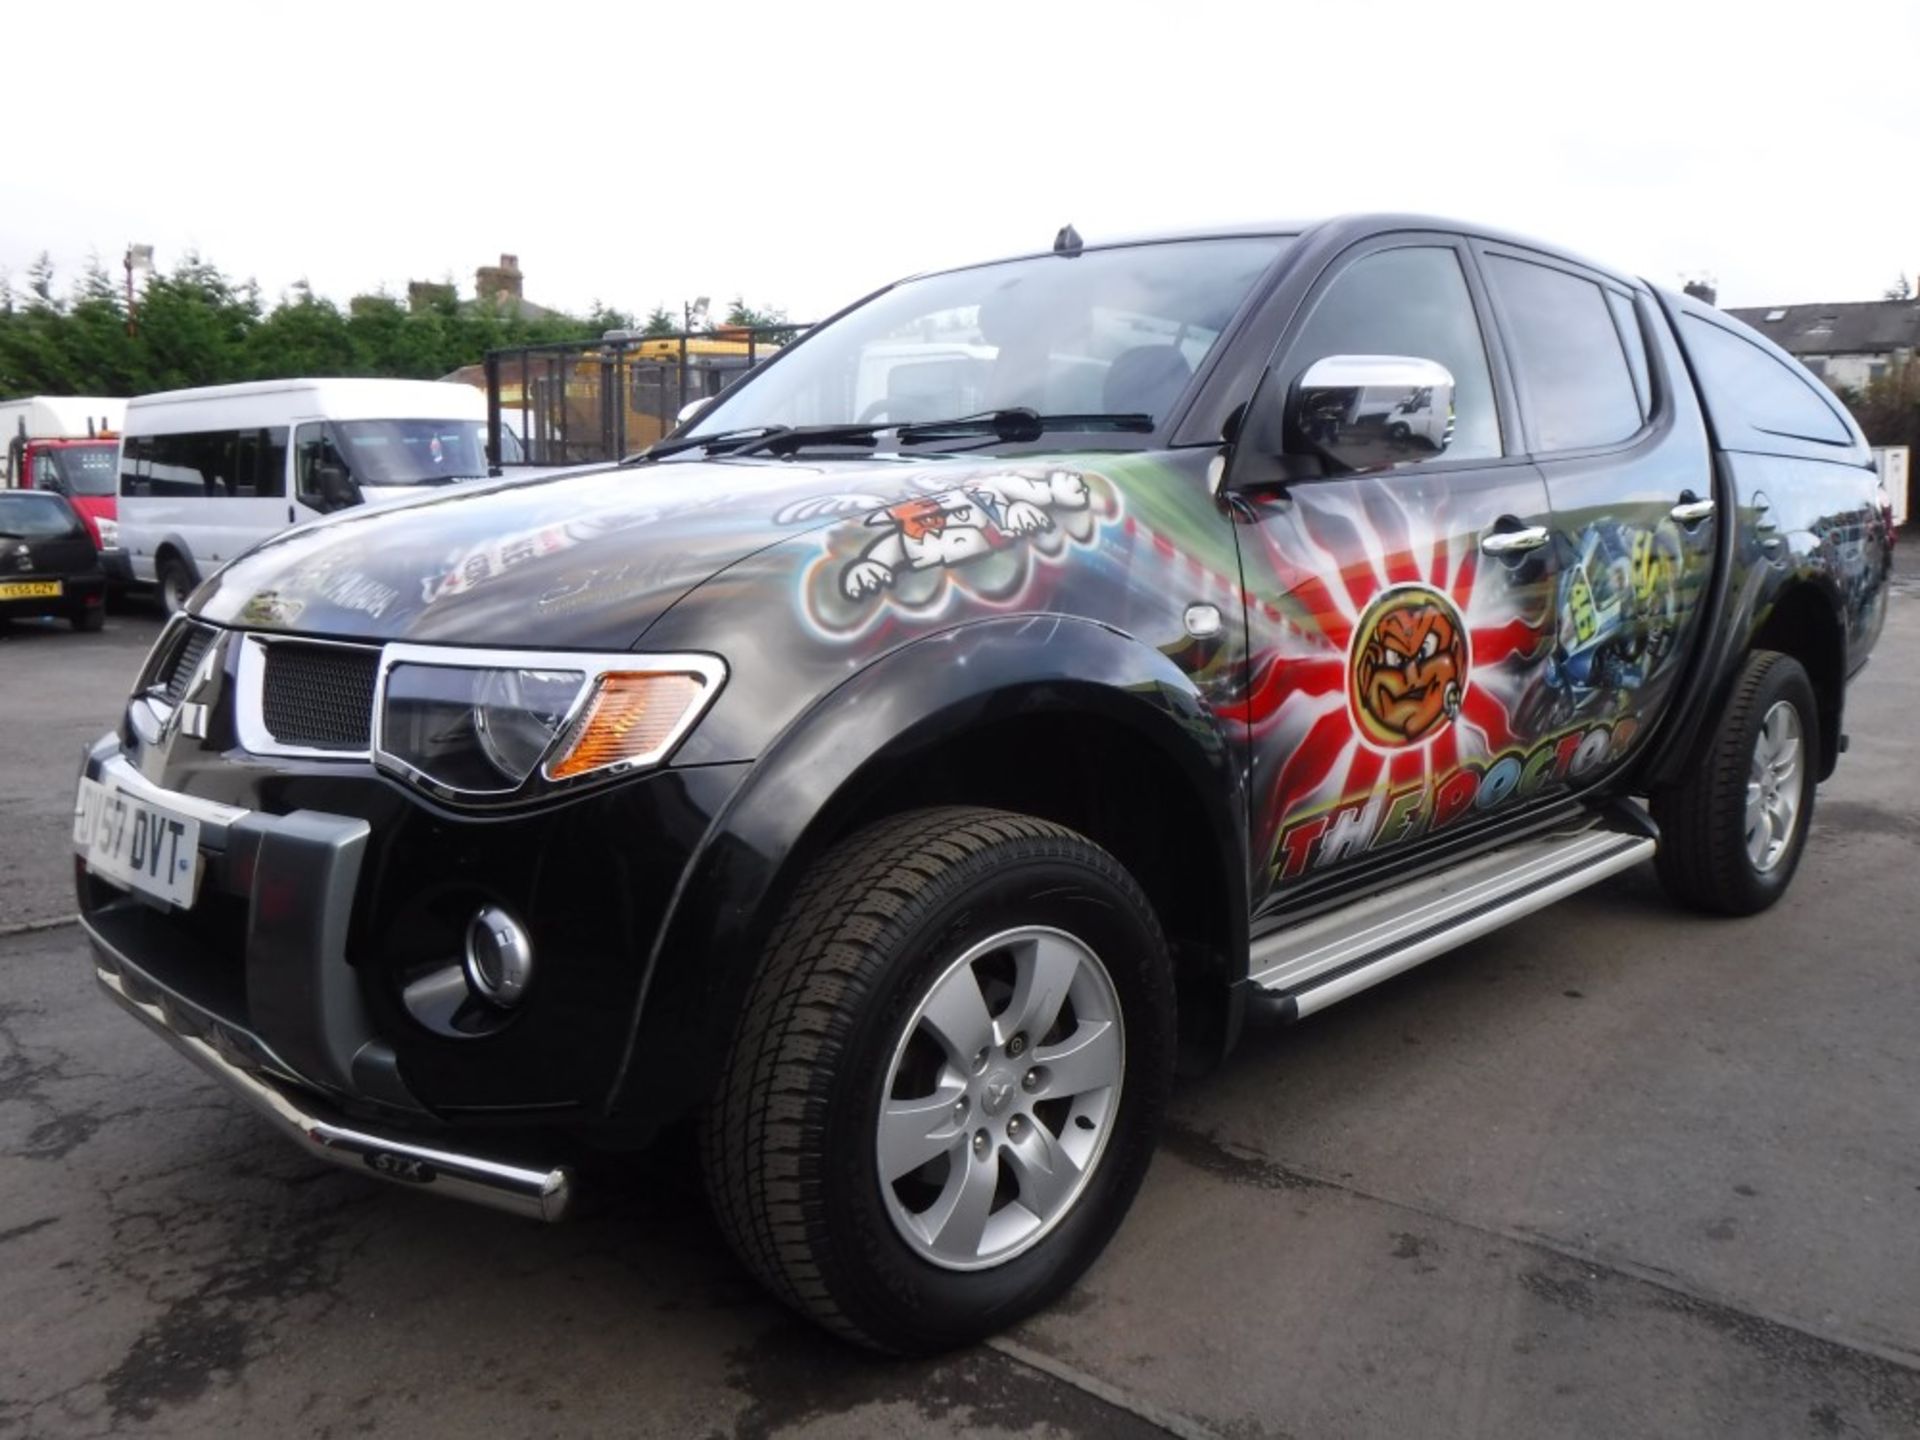 57 reg MITSUBISHI L200 ANIMAL DI-D D/C PICKUP WITH CUSTOMISED VALENTINO ROSSI AIR BRUSHED PAINTWORK, - Image 2 of 6